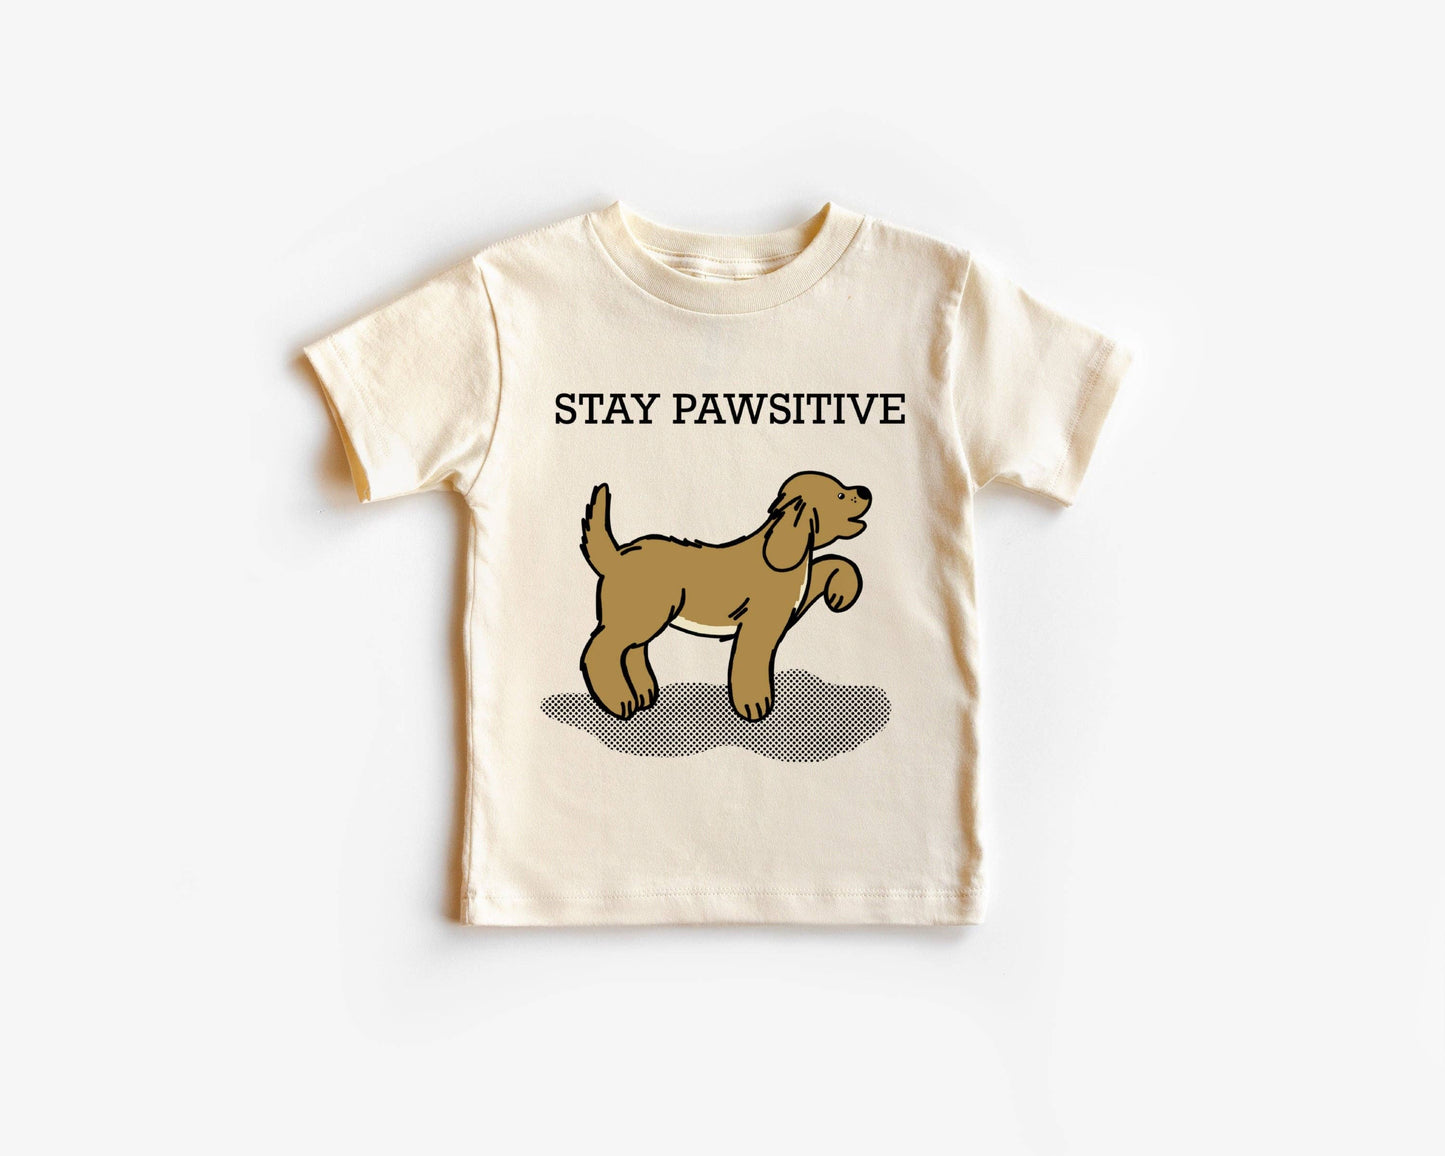 Stay Pawsitive - Dog